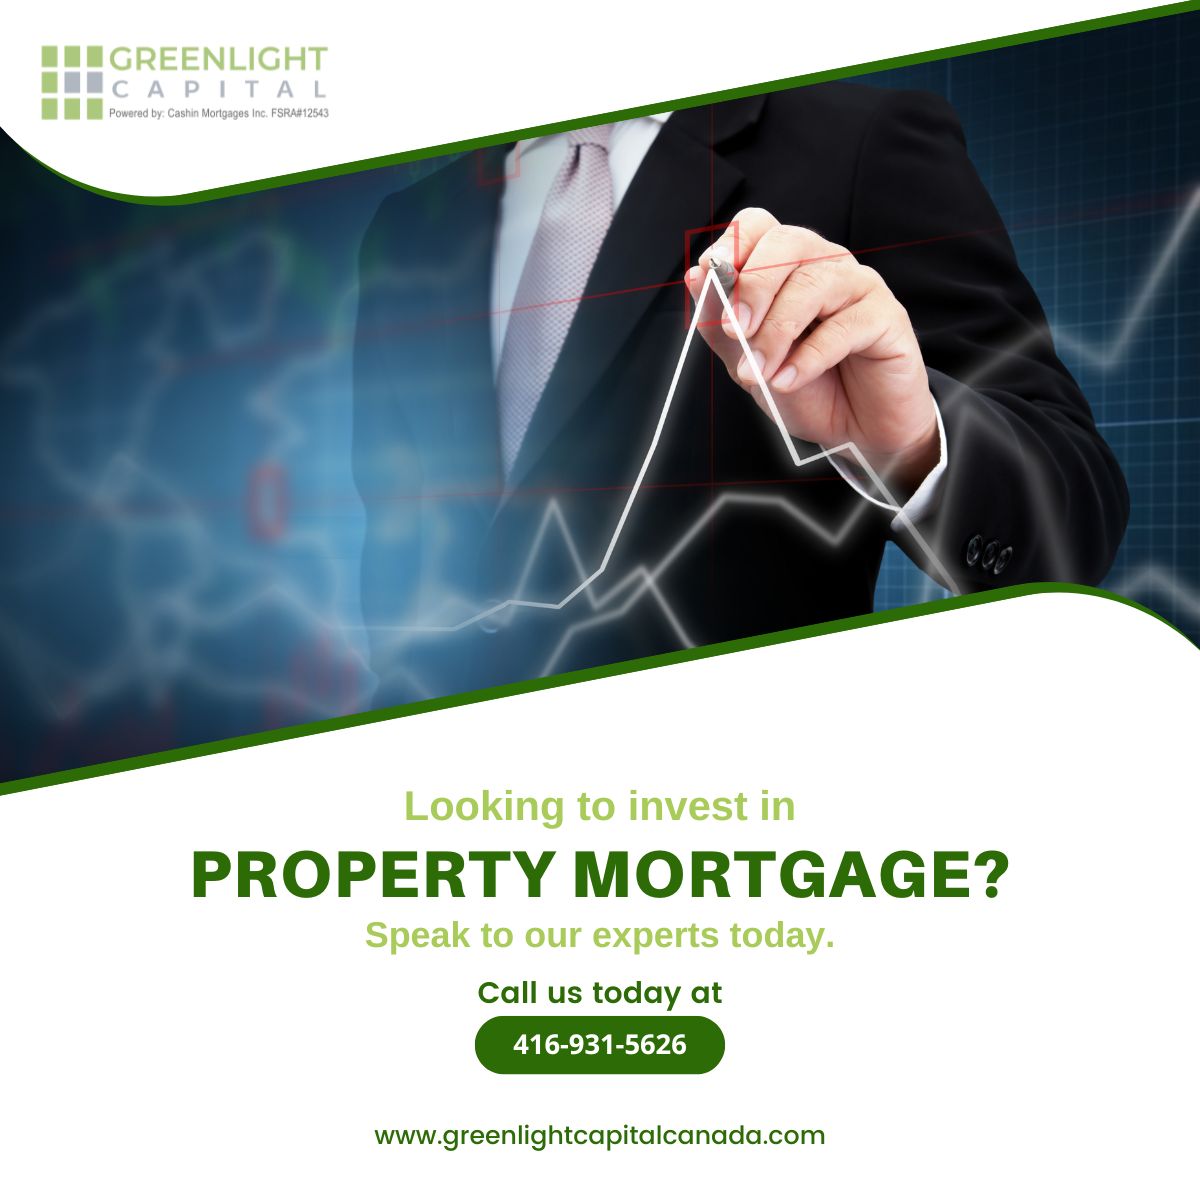 Seeking investors for property mortgages? Look no further! 💼🏠Contact us today at 416-931-5626 to discuss investment opportunities and explore how we can help you achieve your property investment goals.

#PropertyInvestment #RealEstateFinance #Greenlightcapital #Privatelender